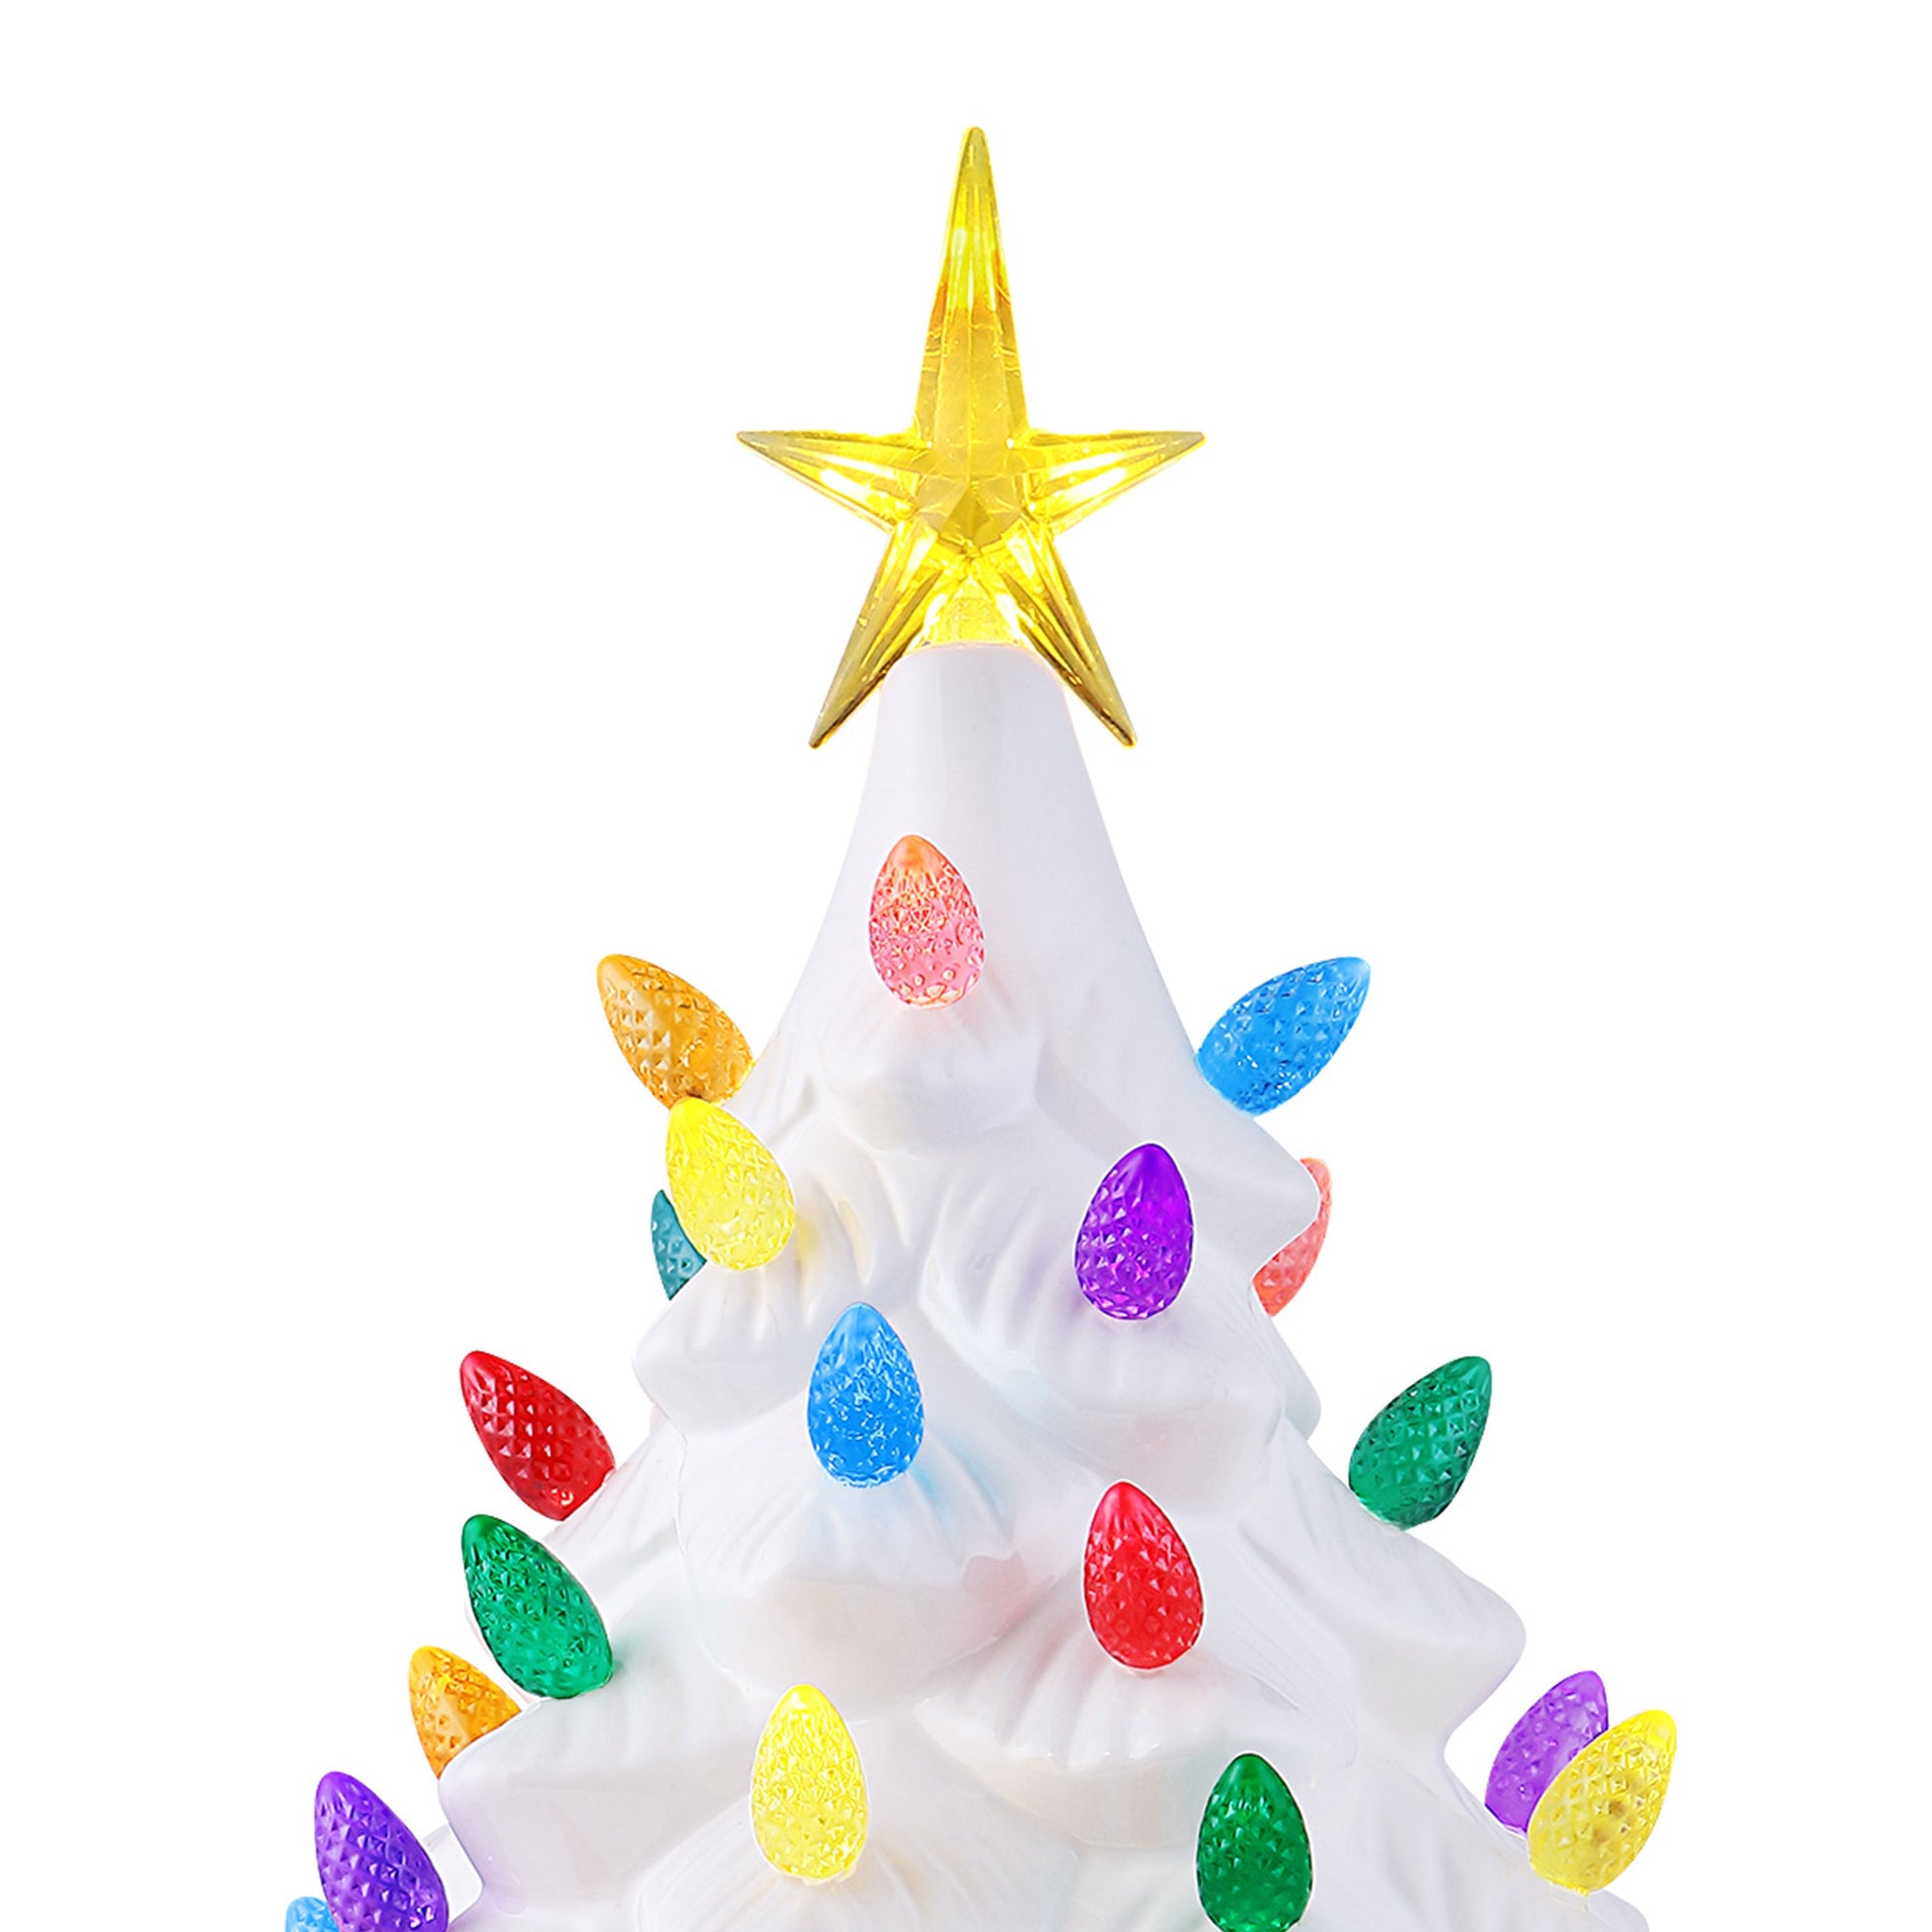  Mr. Christmas Nostalgic Ceramic Christmas Tree with LED Lights  Indoor Decoration, 24 Inches, White : Home & Kitchen